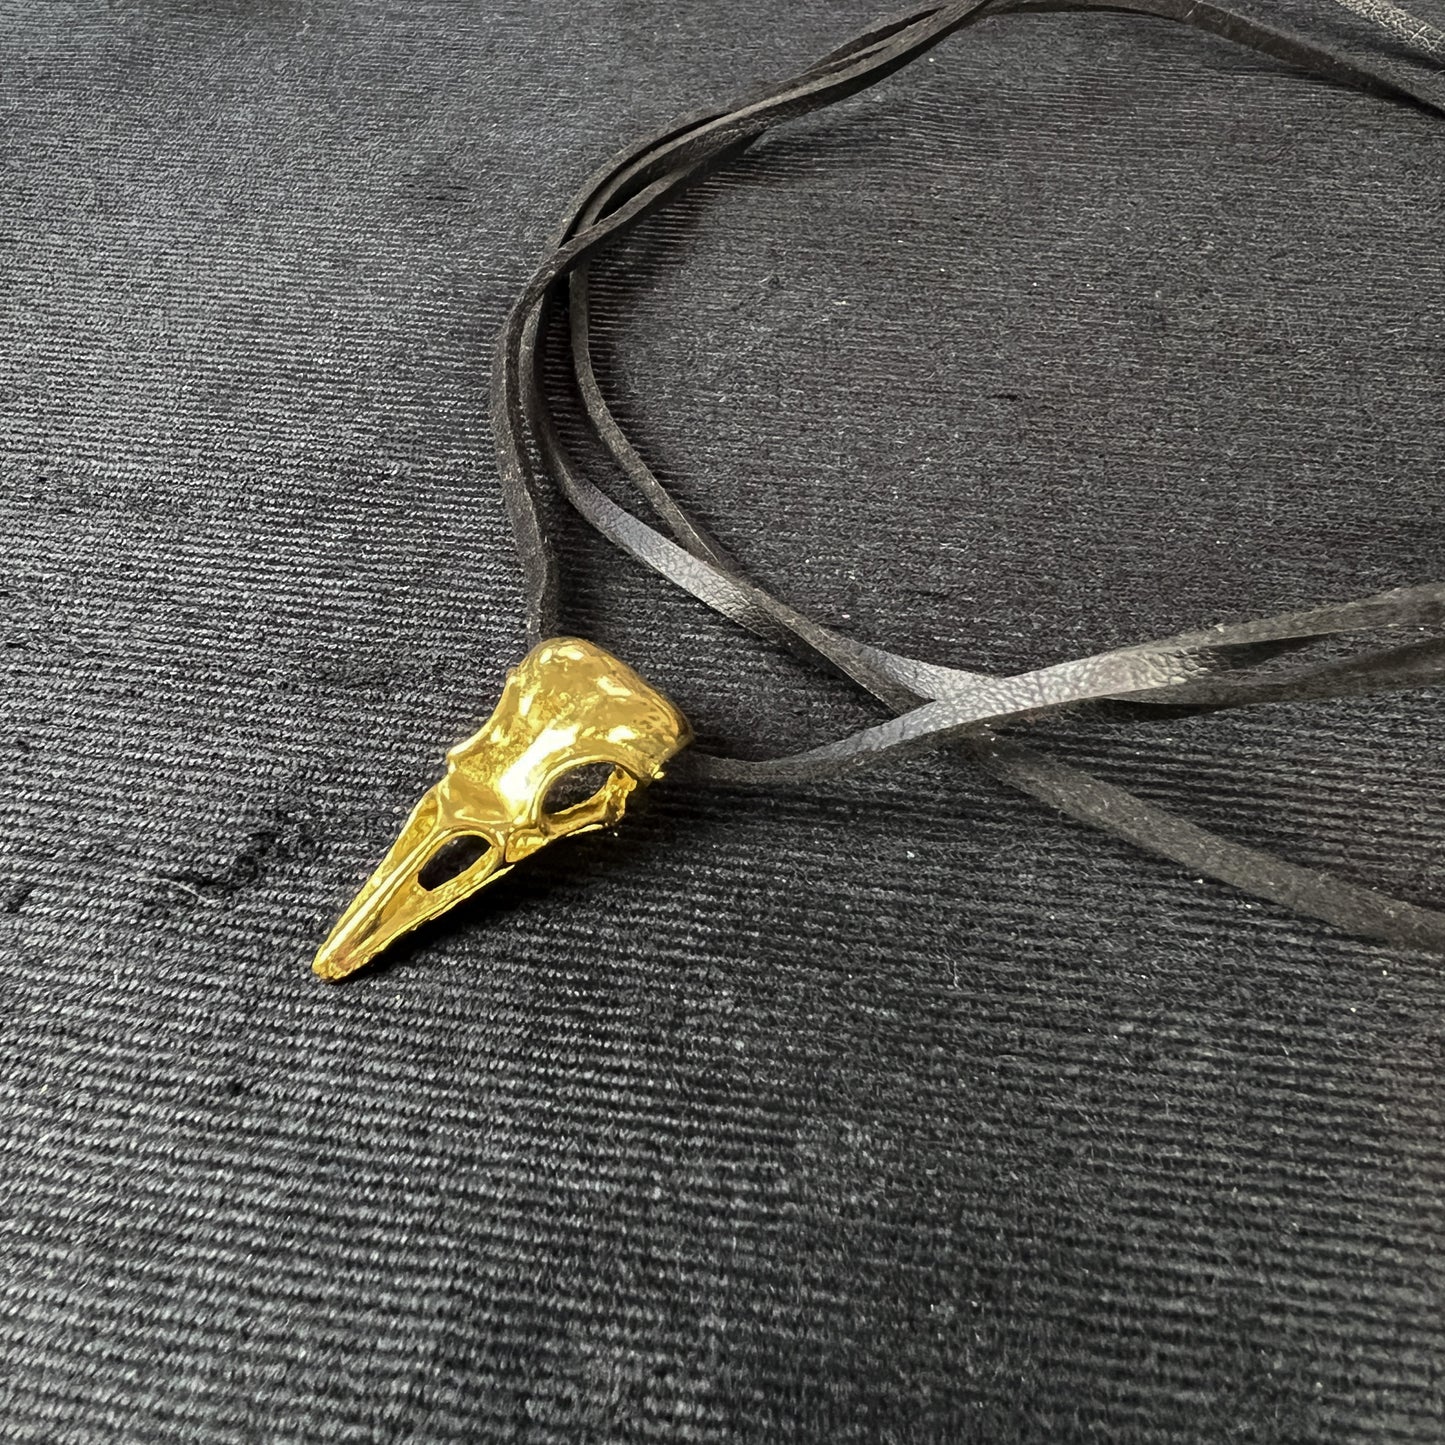 Witchy jewelry golden Bird skull choker vegan leather gothic necklace statement pagan jewelry wrap choker with a raven skull